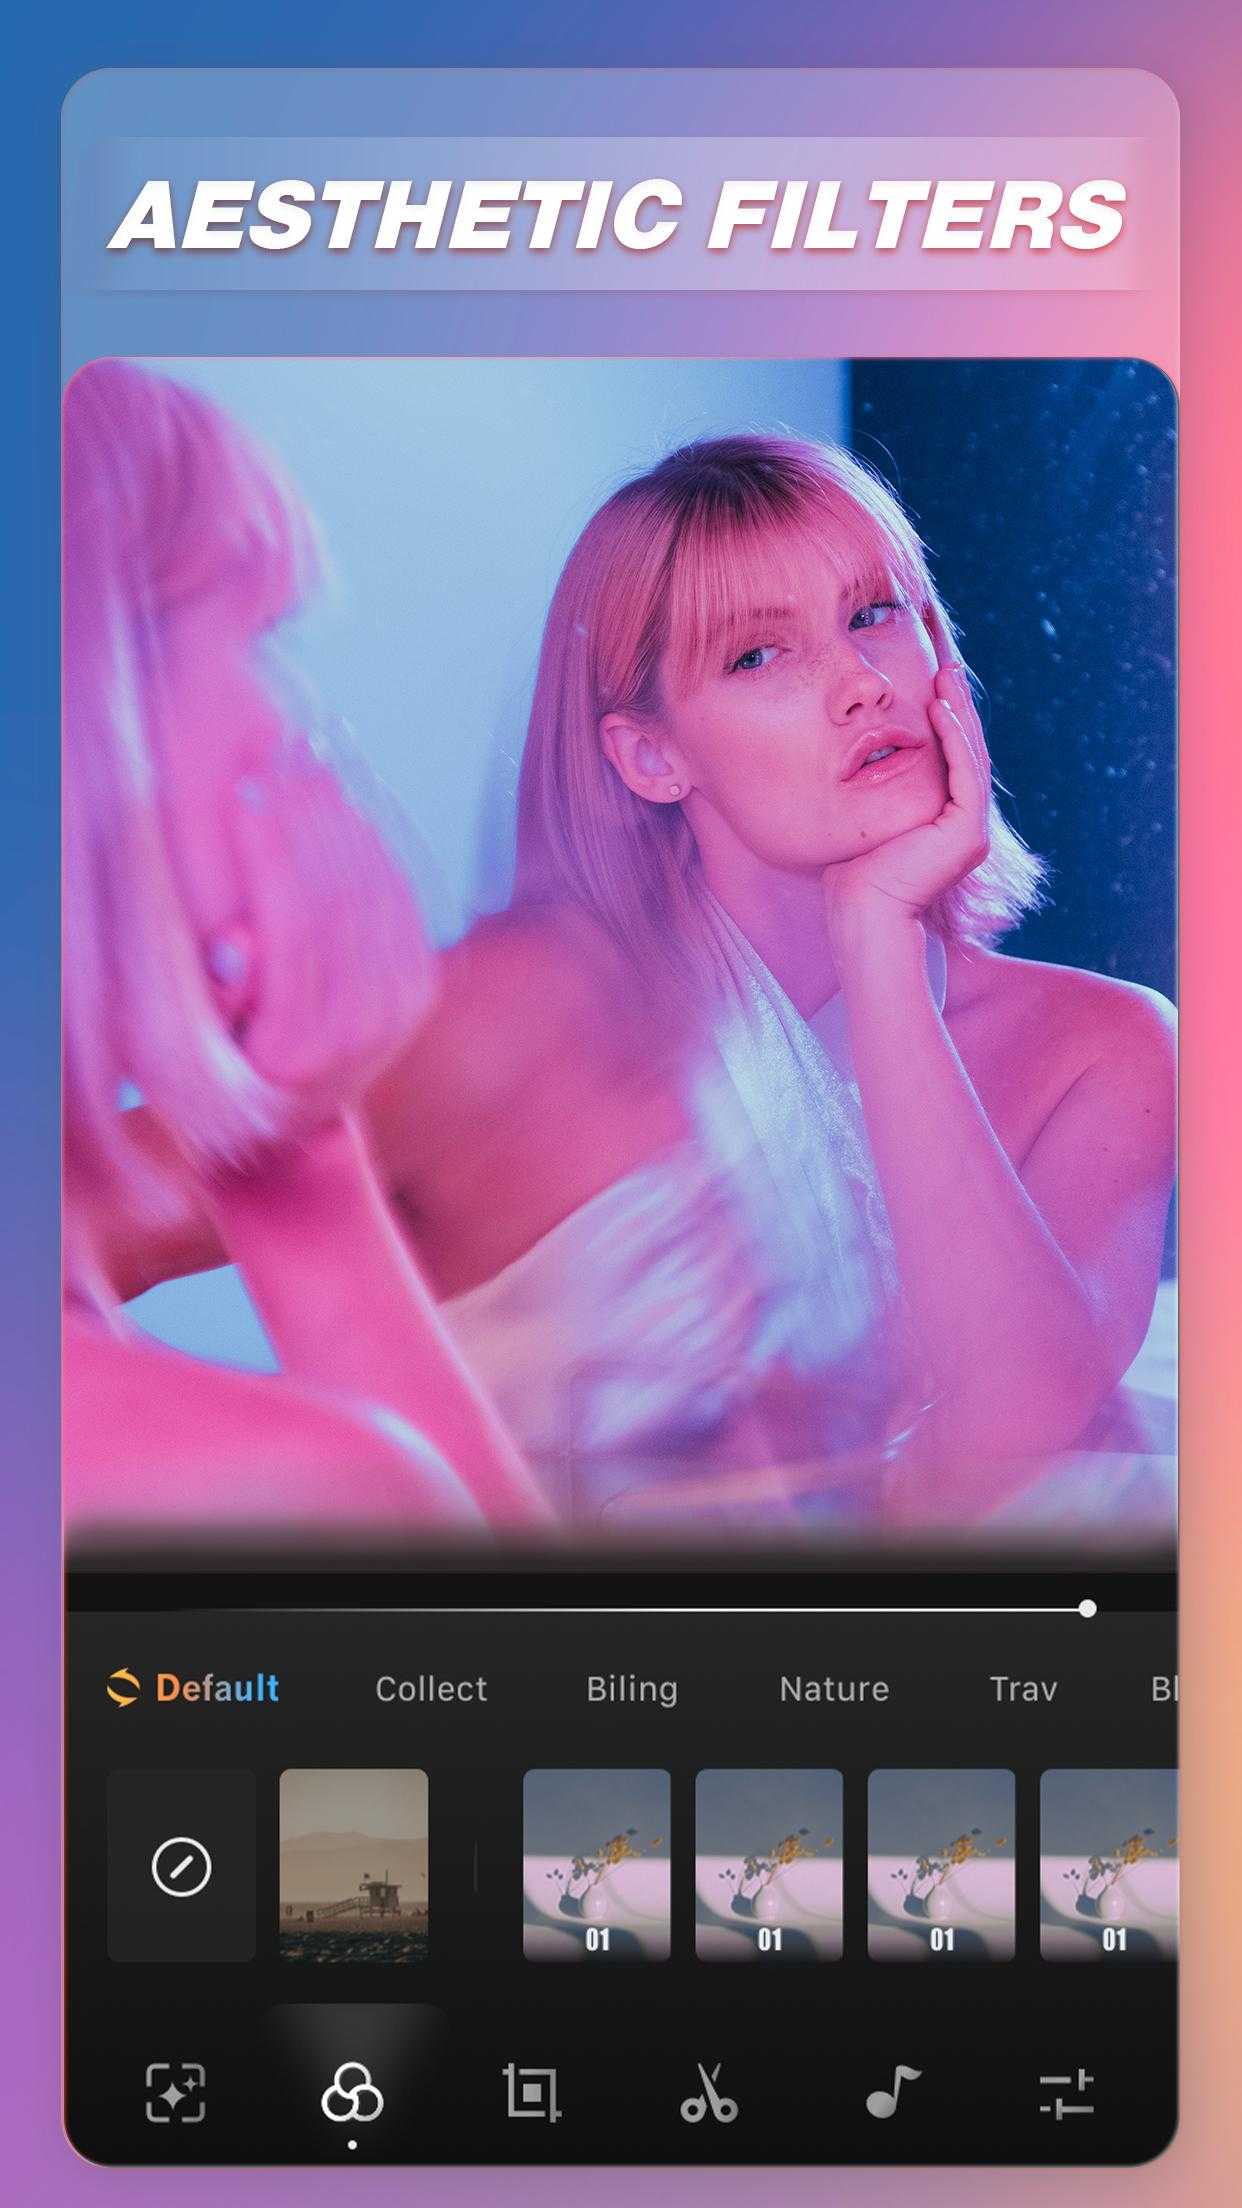 Video Effects & Aesthetic Filter Editor – Fito.ly v2.3.87 (Premium) (Mod) APK